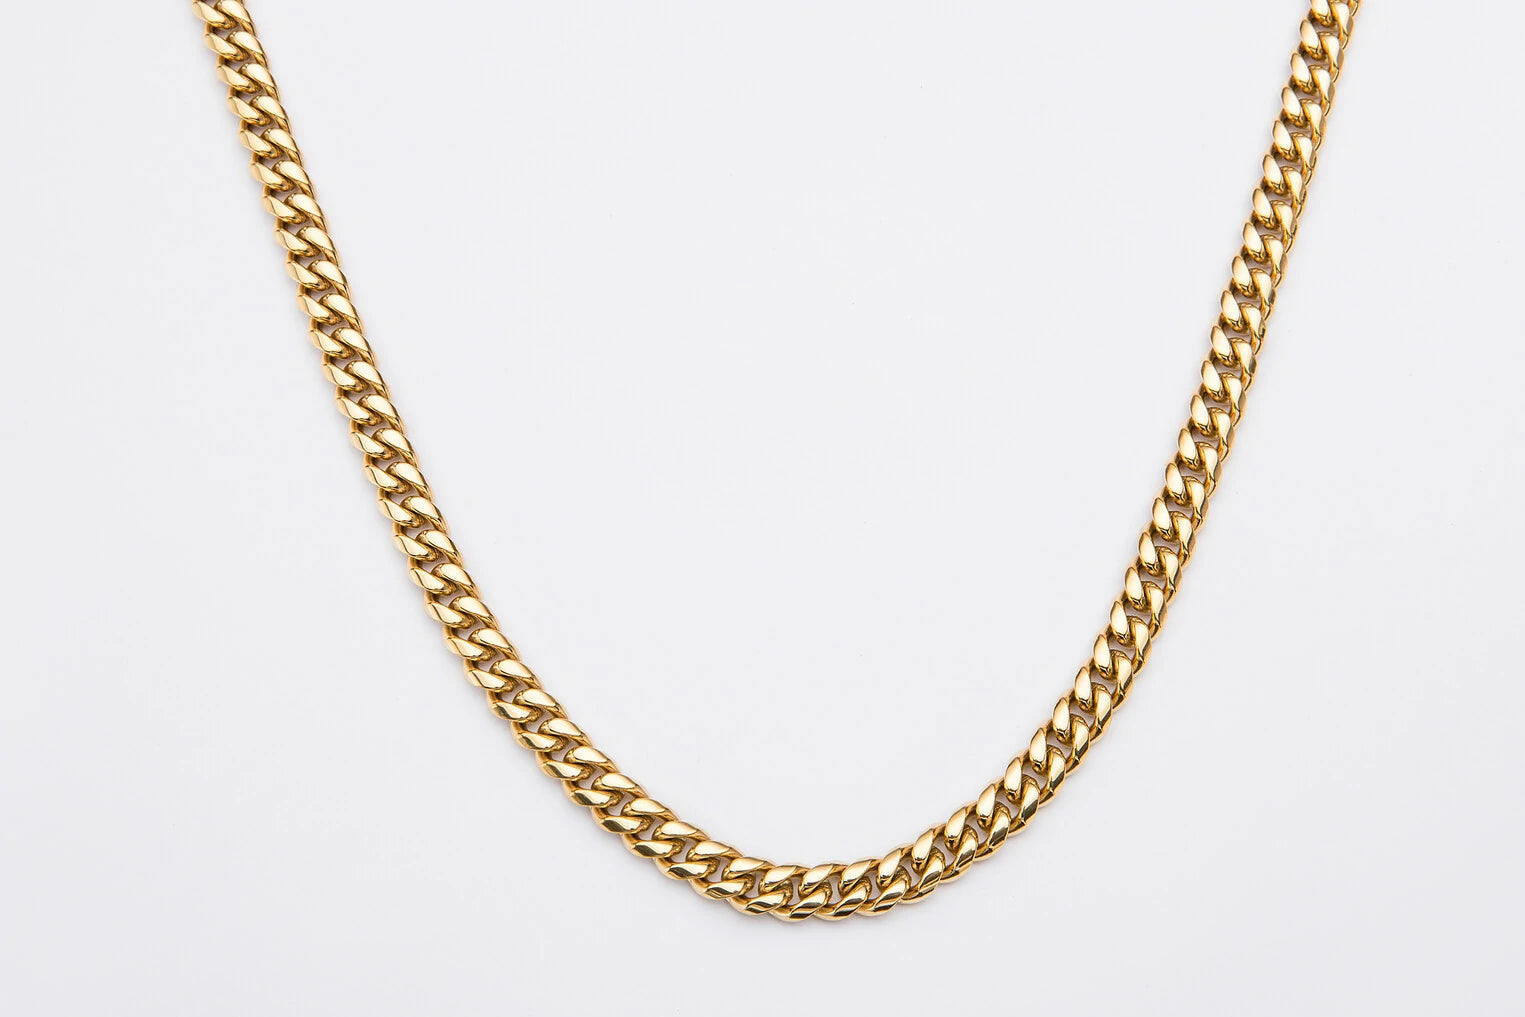 8mm Gold Miami Cuban Link Chain for Men